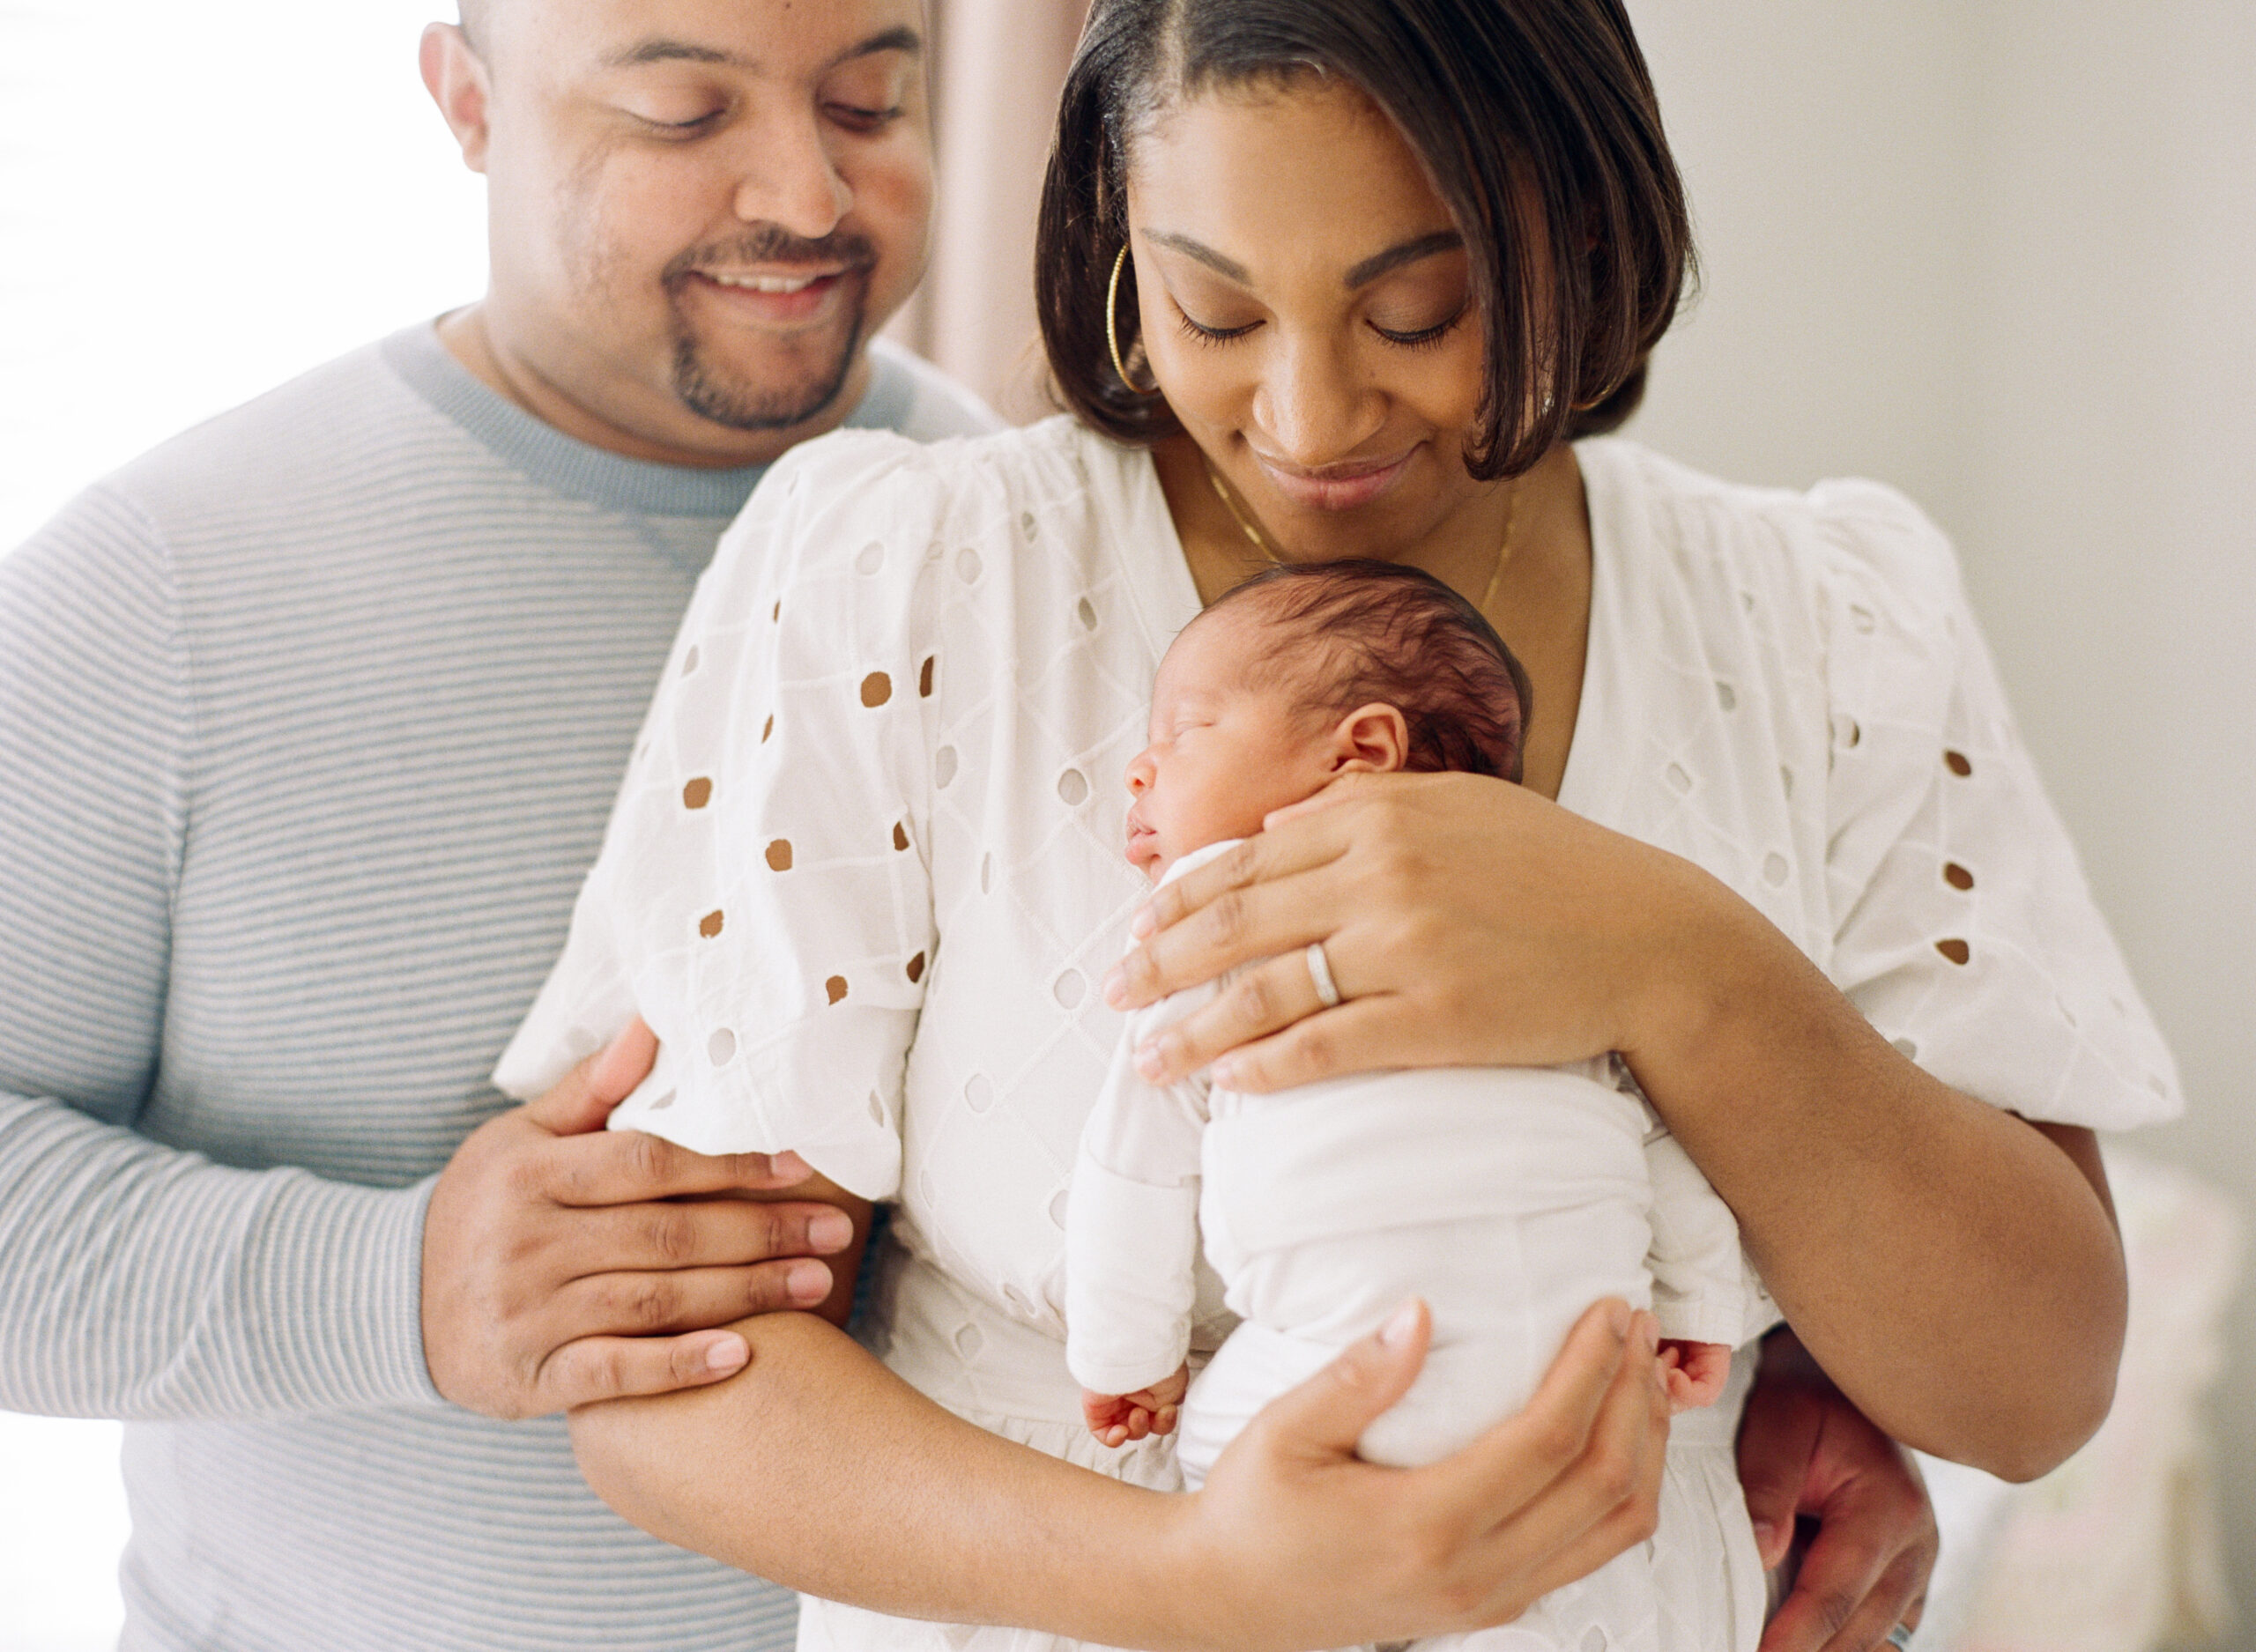 Family cradles newborn girl. Newborn Photographers in Raleigh image by A.J. Dunlap Photography.